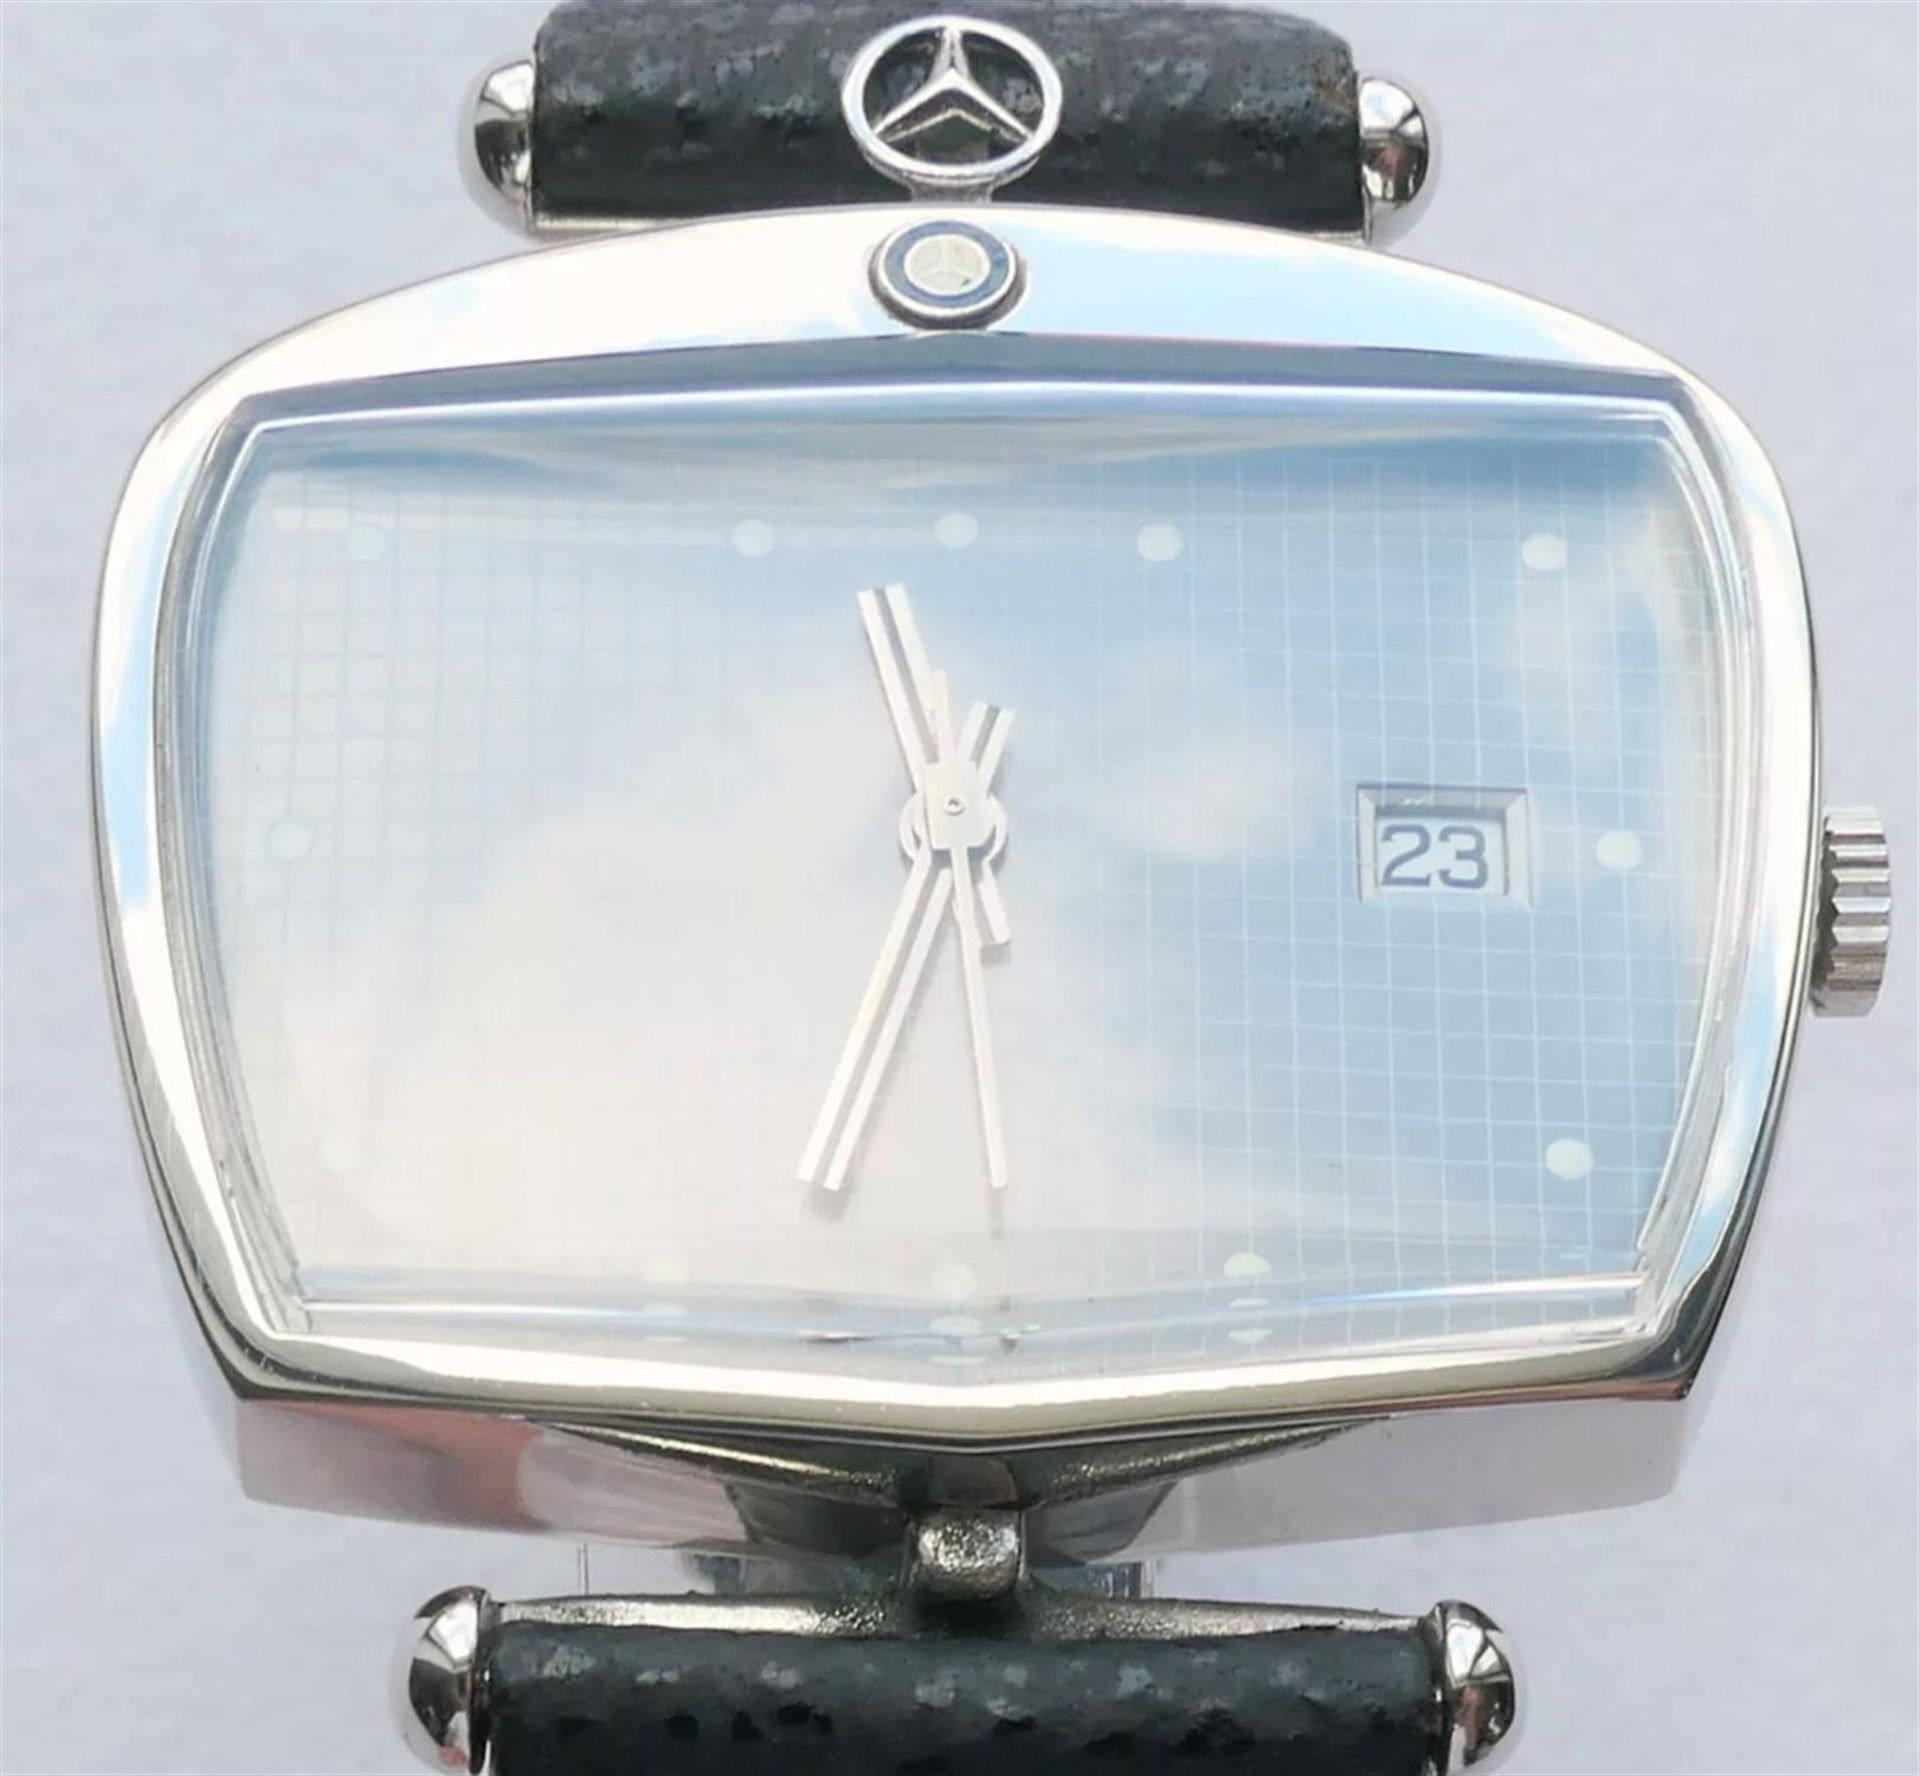 A Rare Mercedes-Benz 'Grille-Head' New Old Stock Wristwatch Evocative of the Famous German Marque - Image 8 of 10